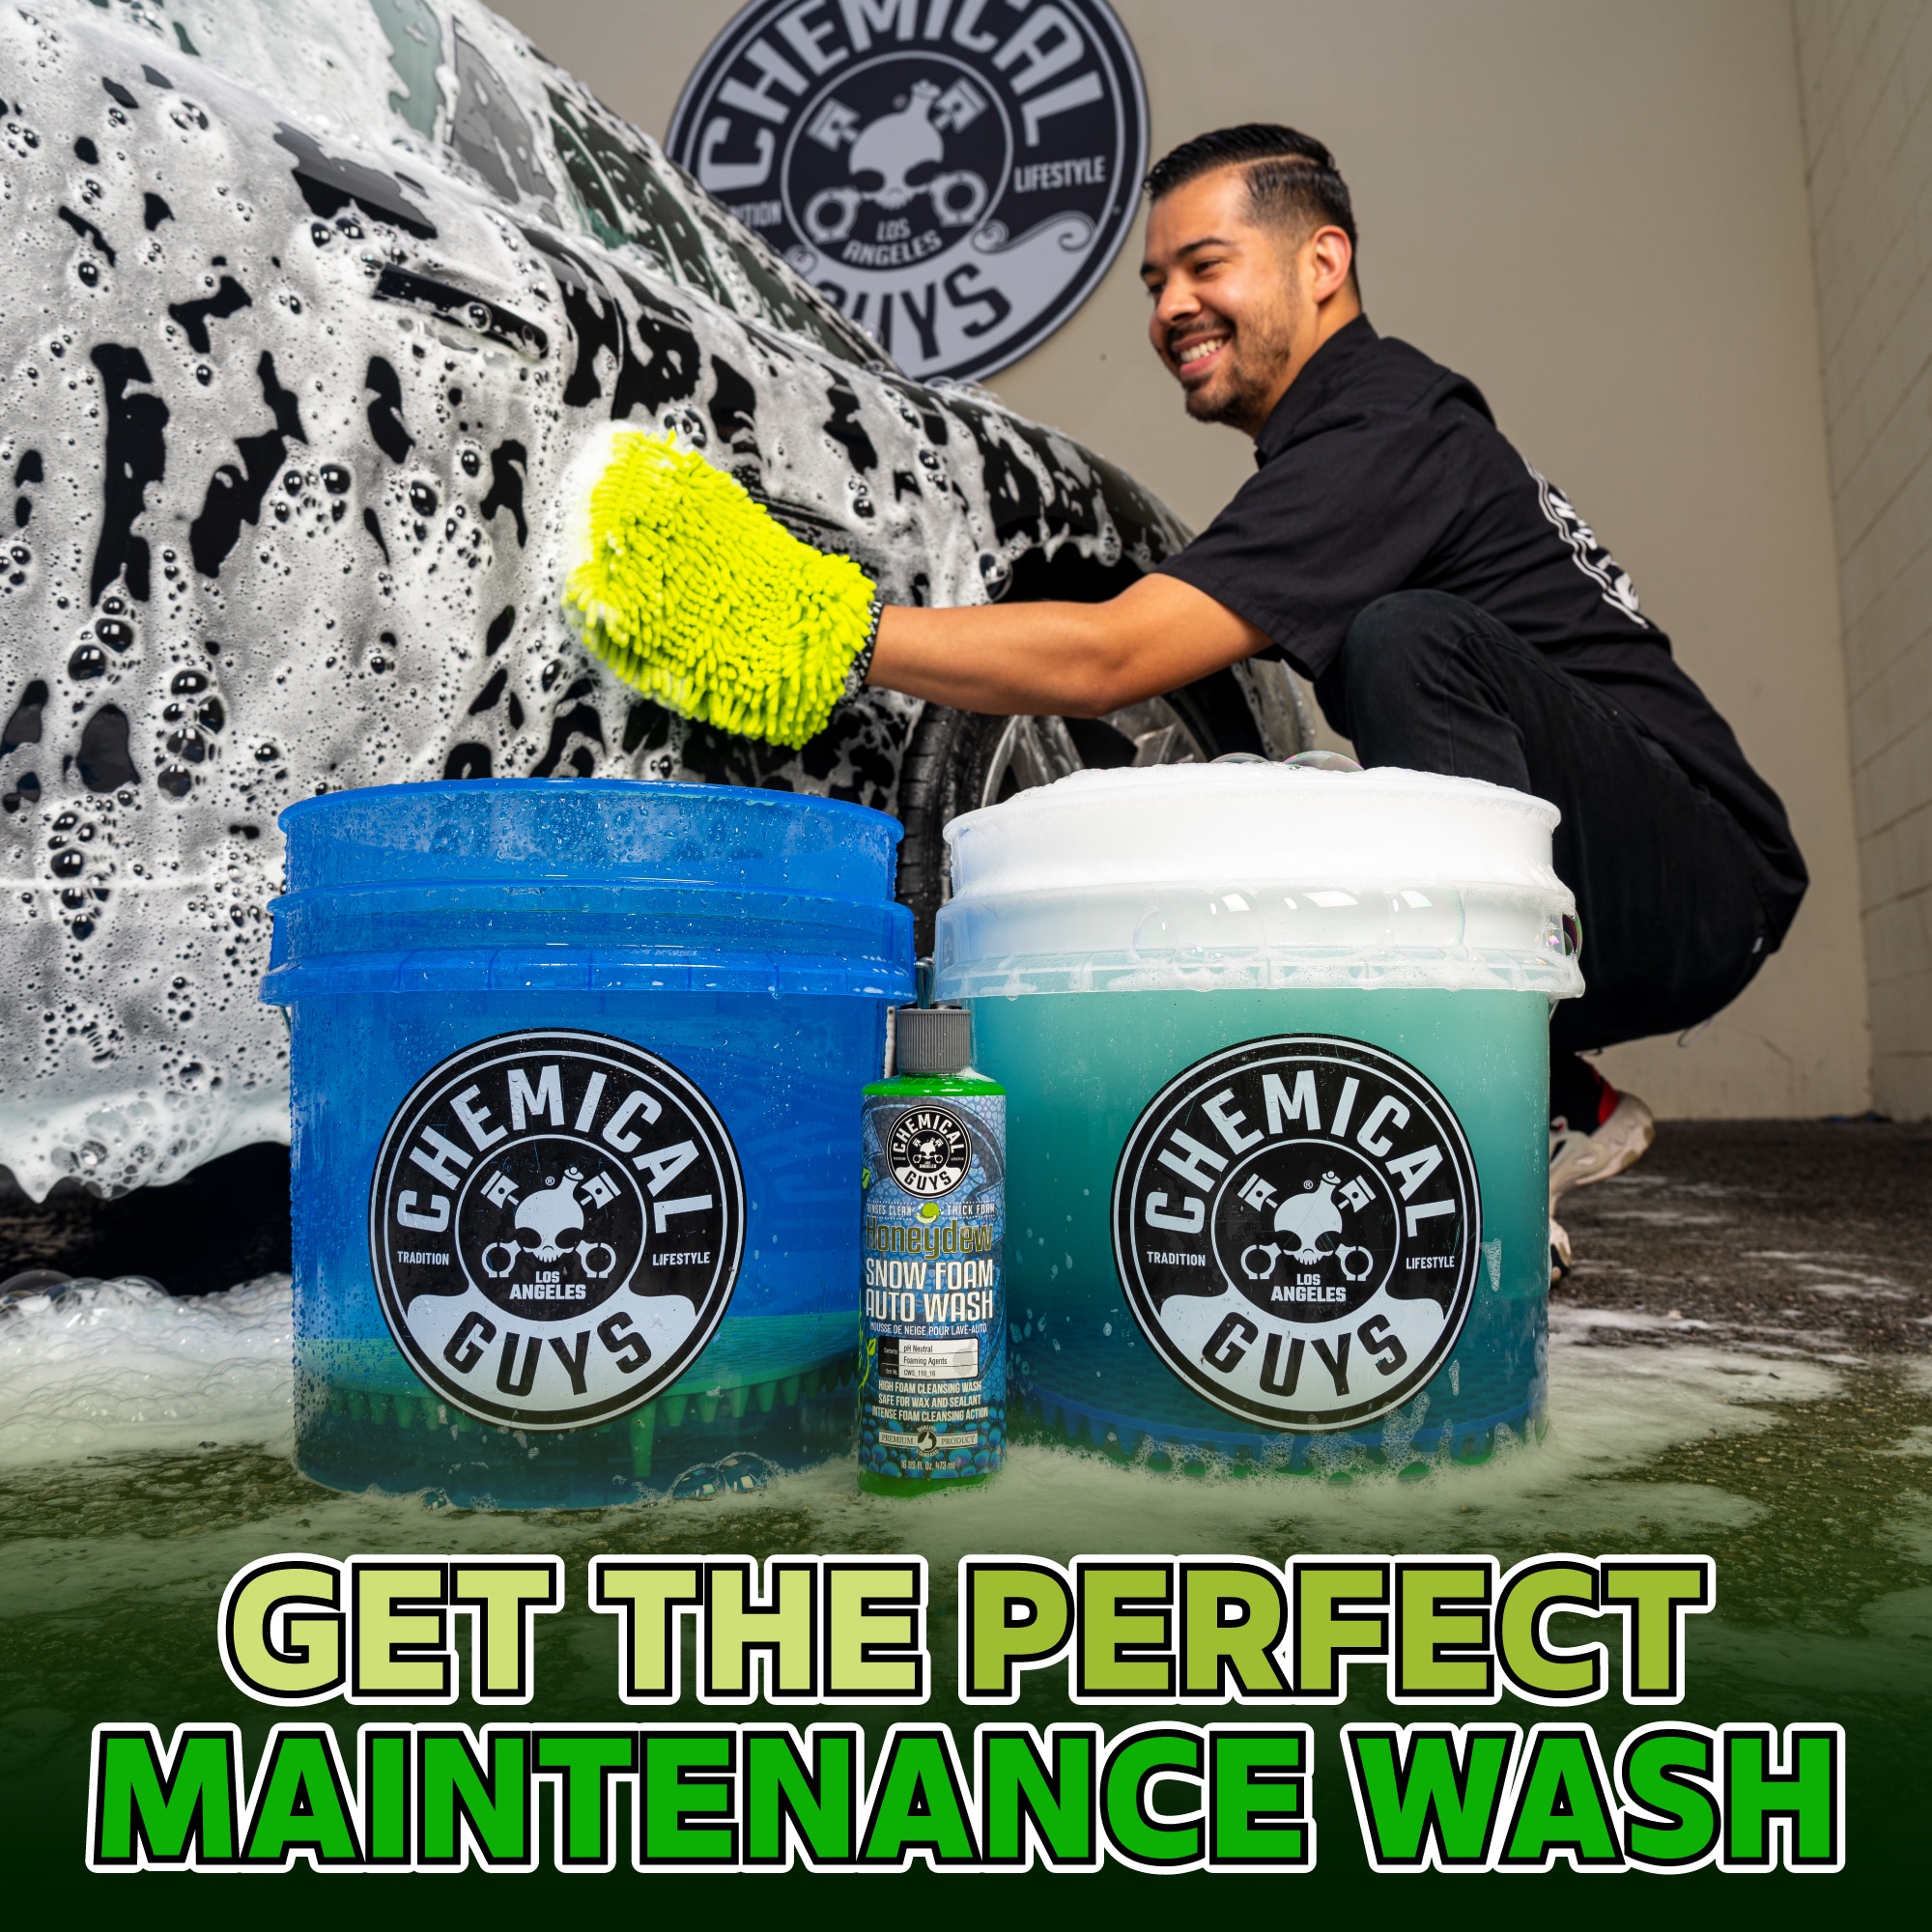 Chemical Guys Professional Wash & Shine Car Cleaning Kit (7 Essential  Products) 